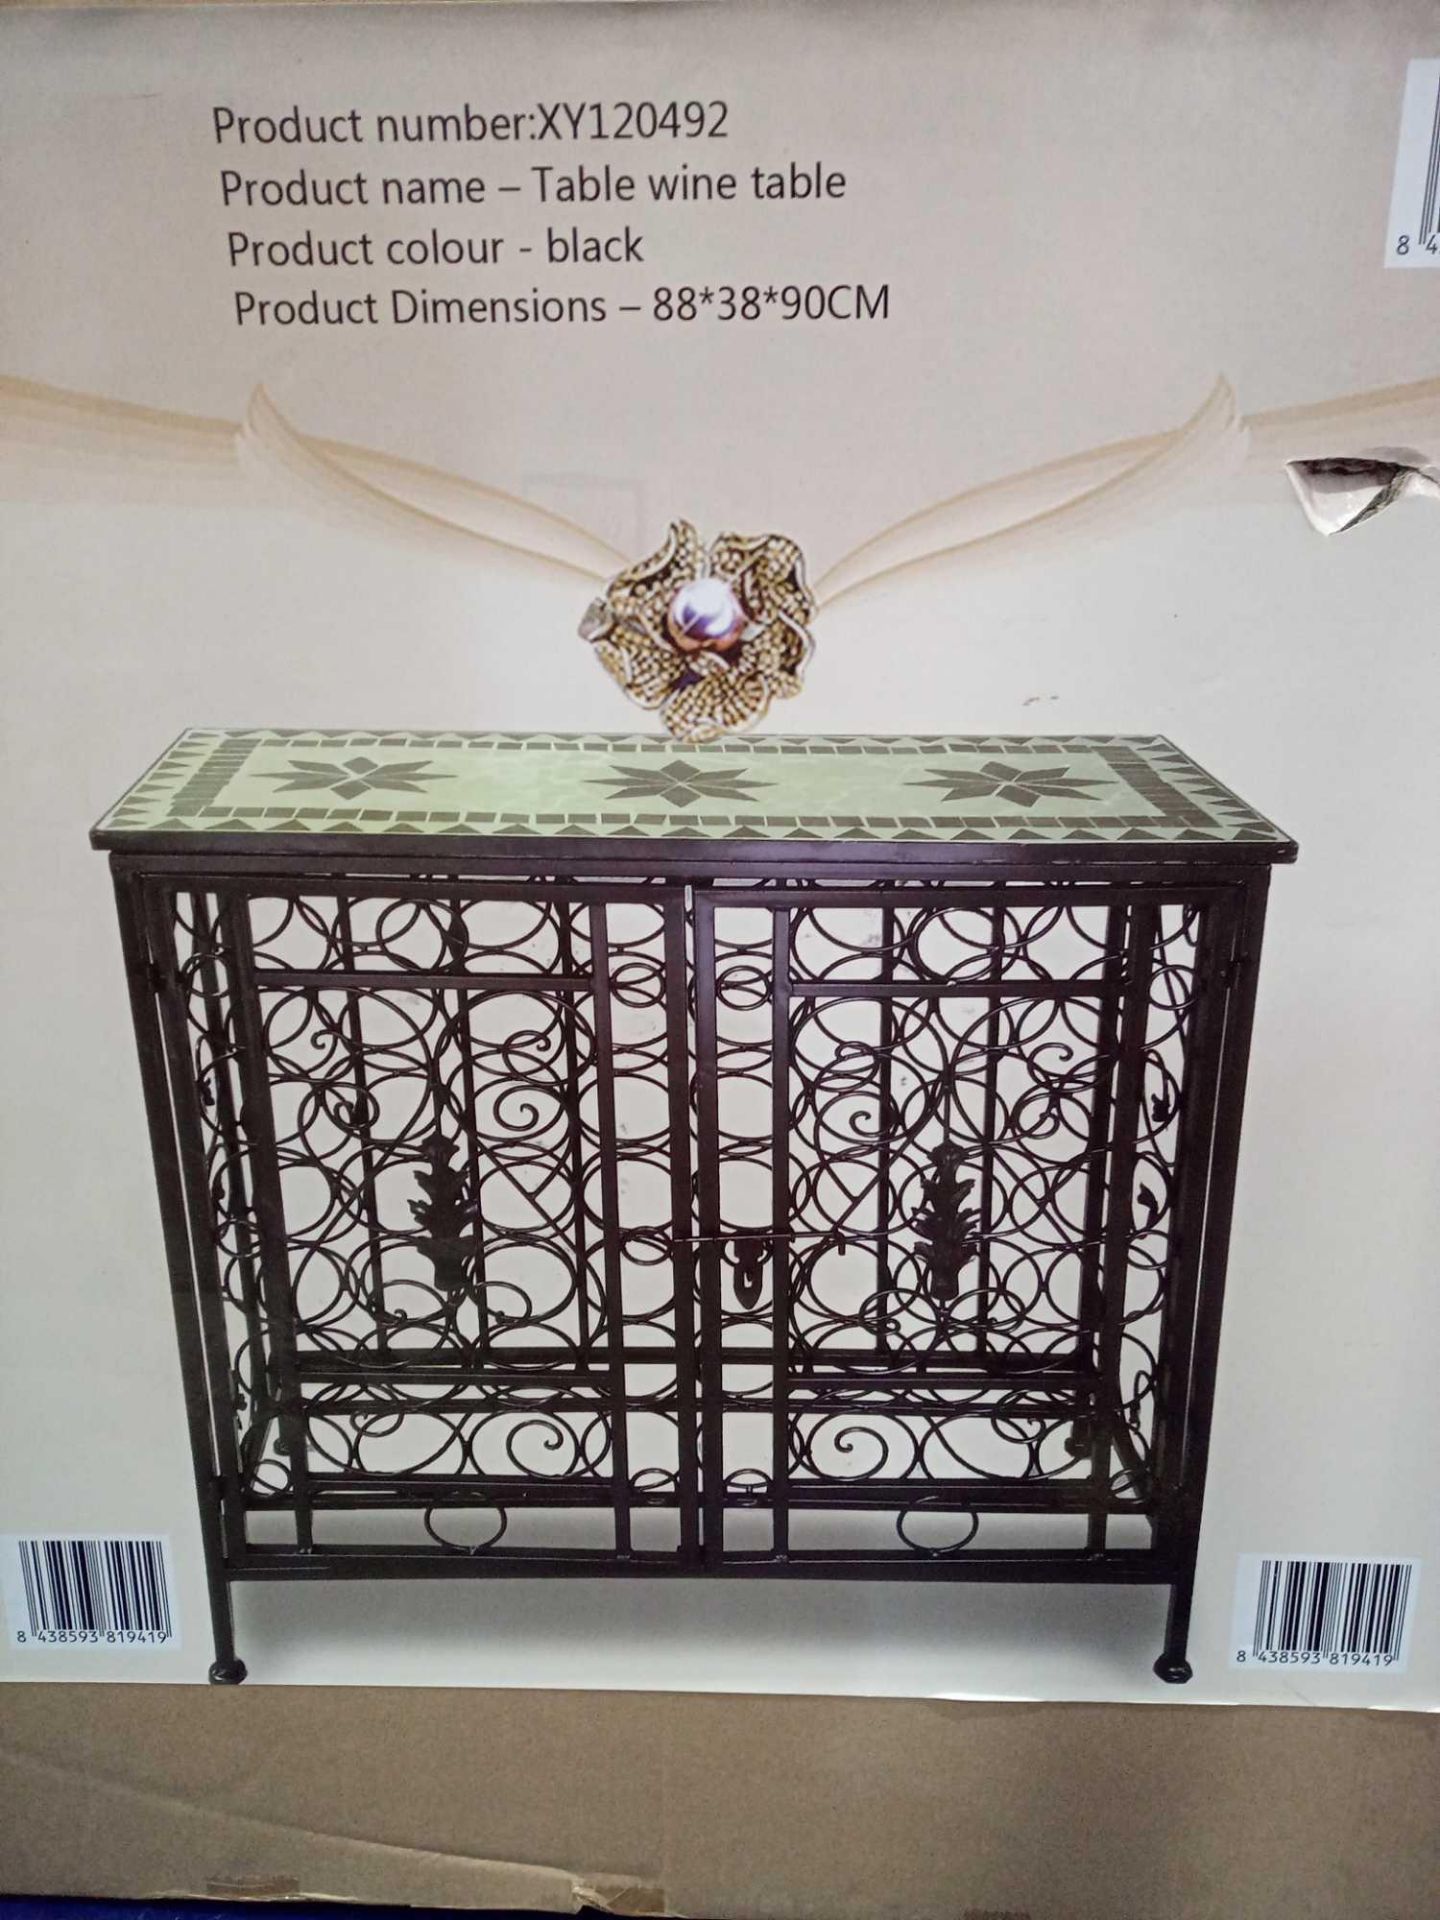 RRP £200 Boxed Table Wine Table With Jewel And Mosaic Tile Design